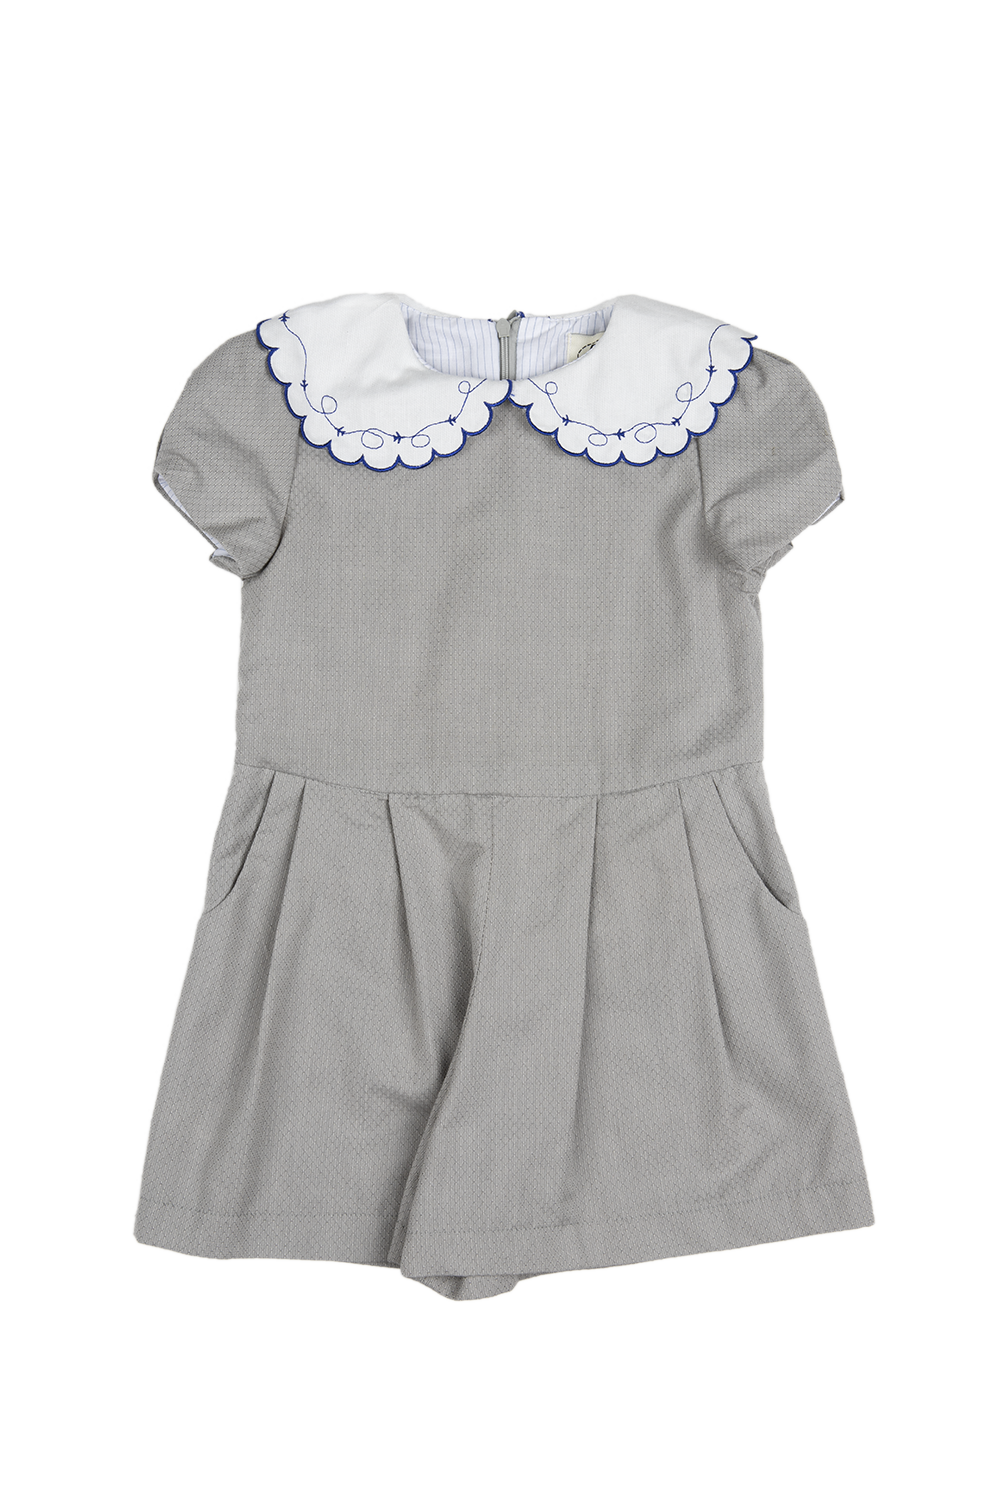 playsuit airplanes collar